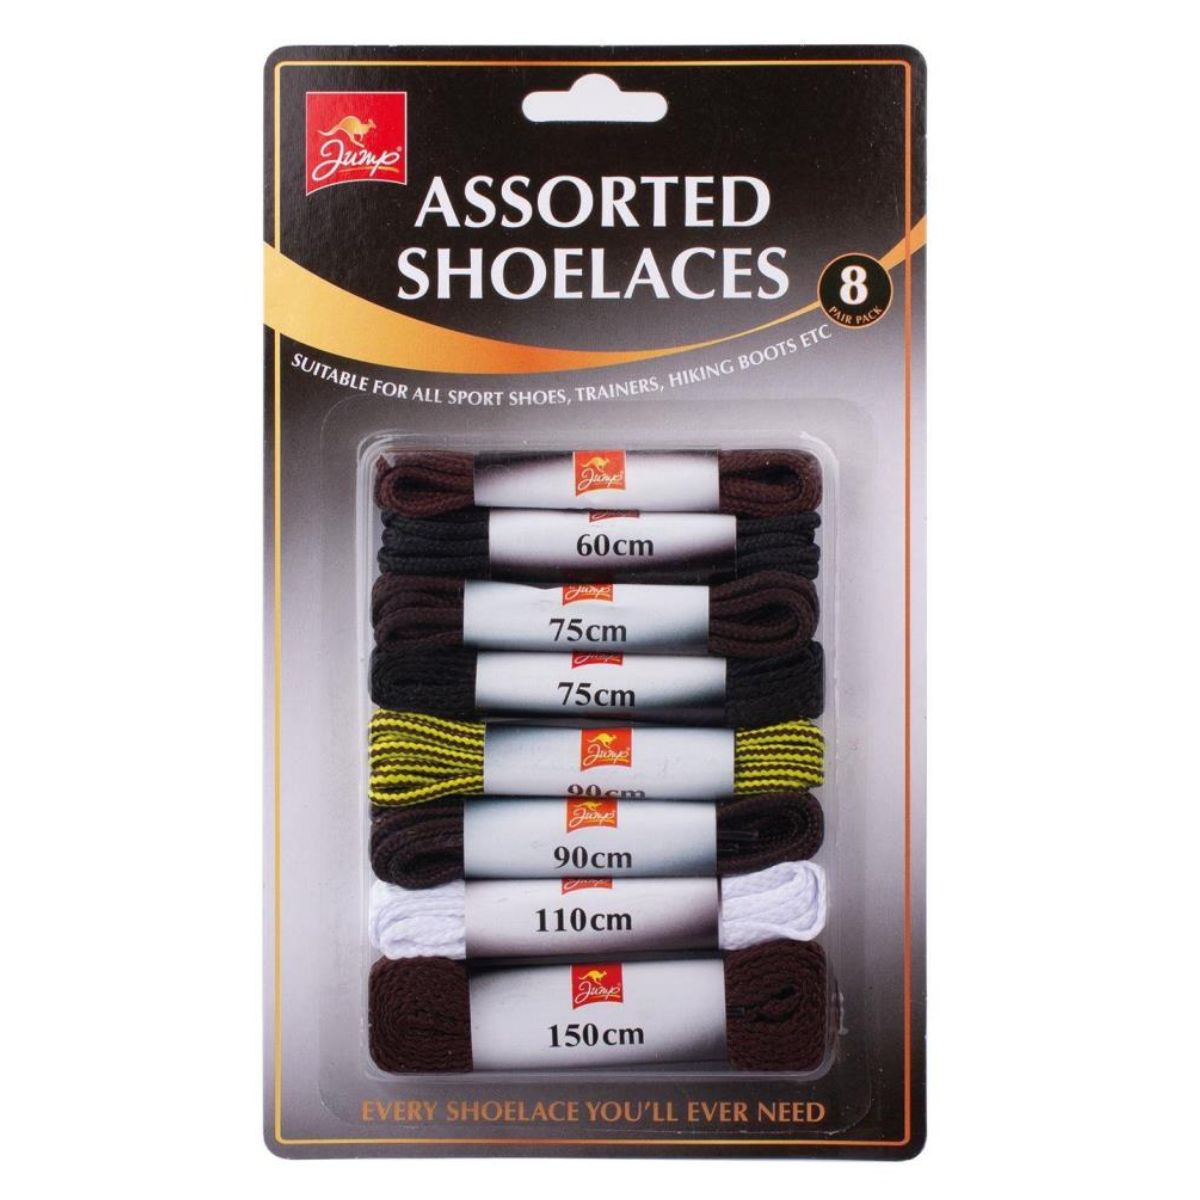 A package of Jump - Assorted Shoelaces - 8pcs in different colors and lengths.